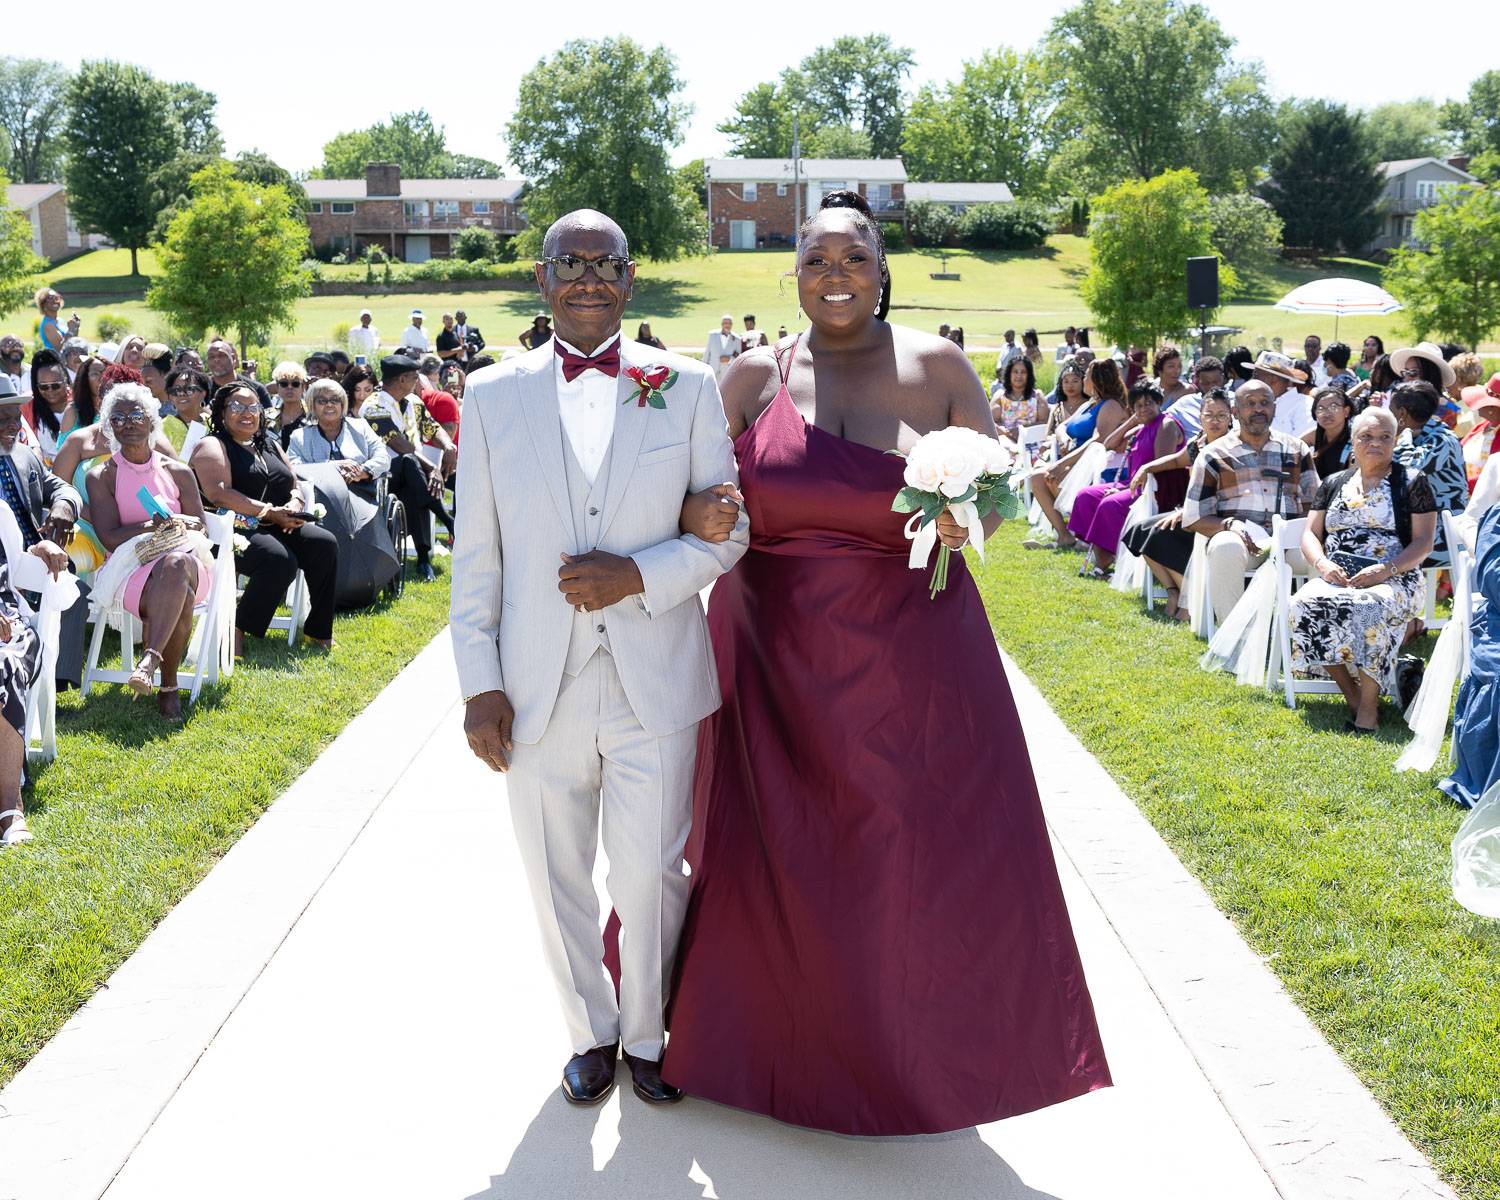 A woman walking down the aisle with a man